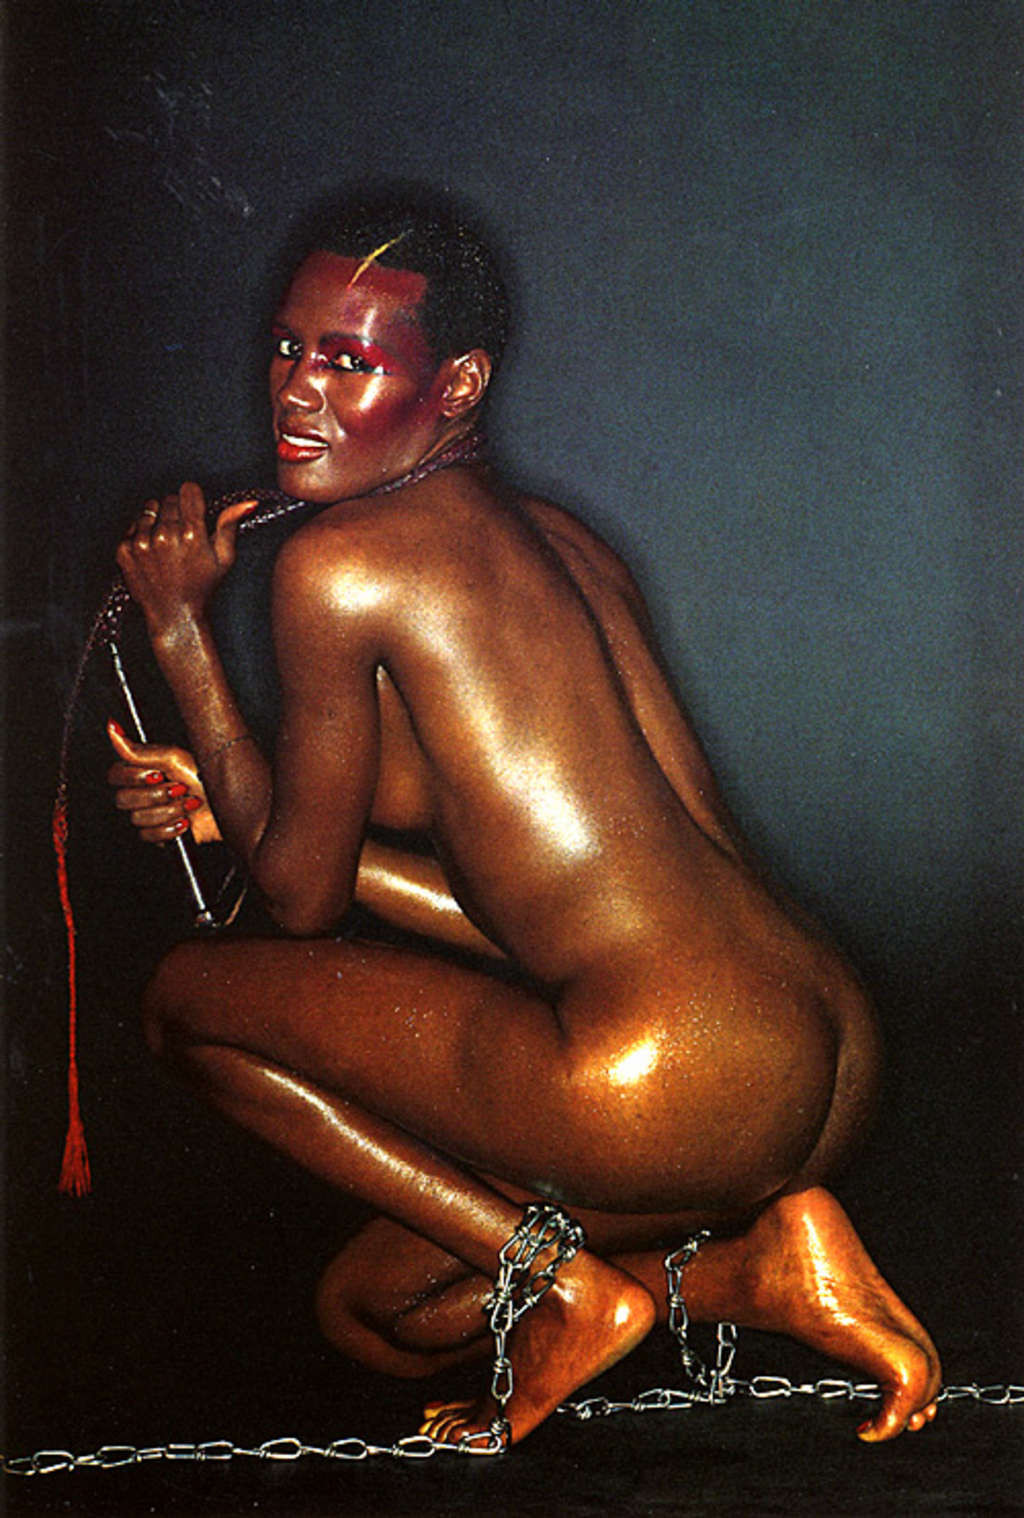 Grace Jones showing her nice ass upskirt on stage paparazzi pictures #75385509